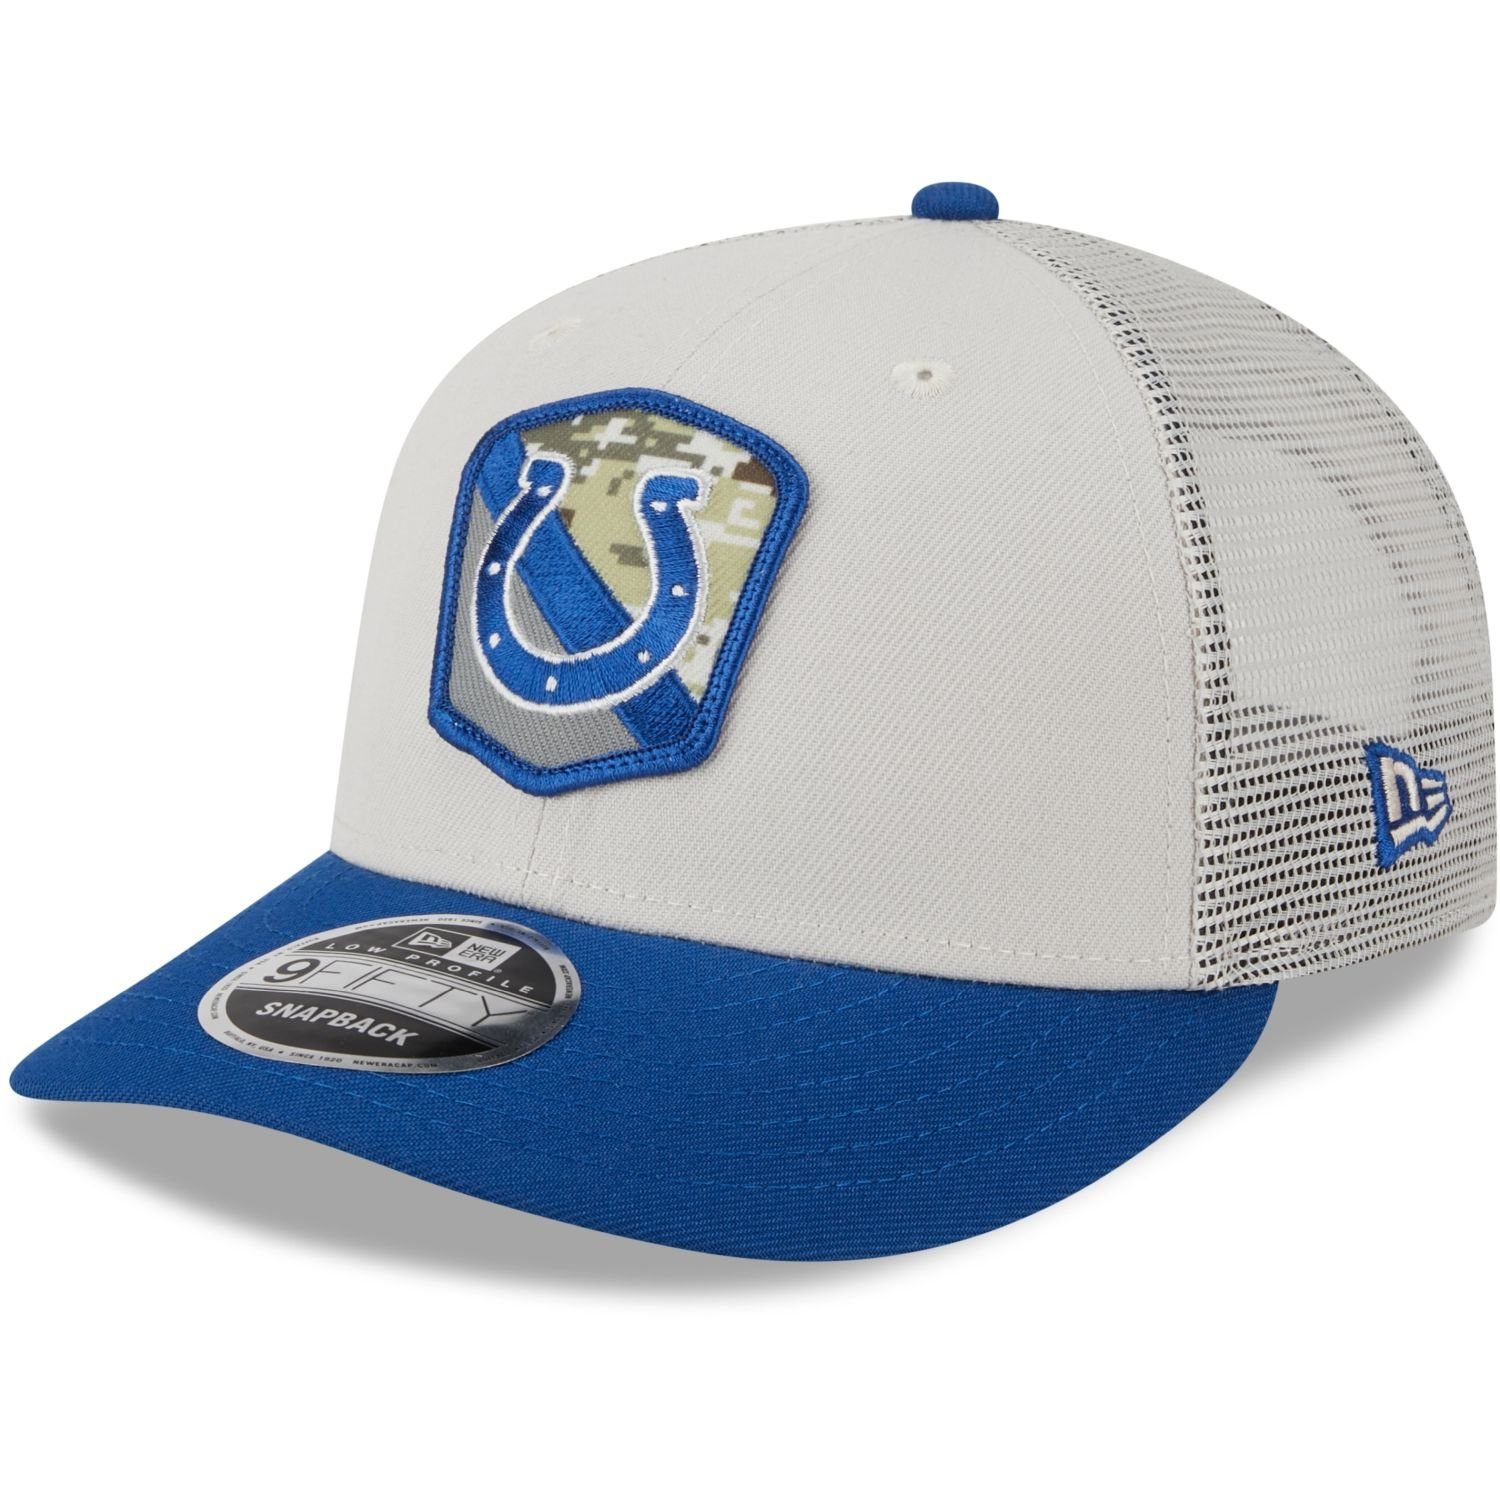 New Era Snapback Cap 9Fifty Indianapolis Profile Colts Salute Service NFL Low Snap to